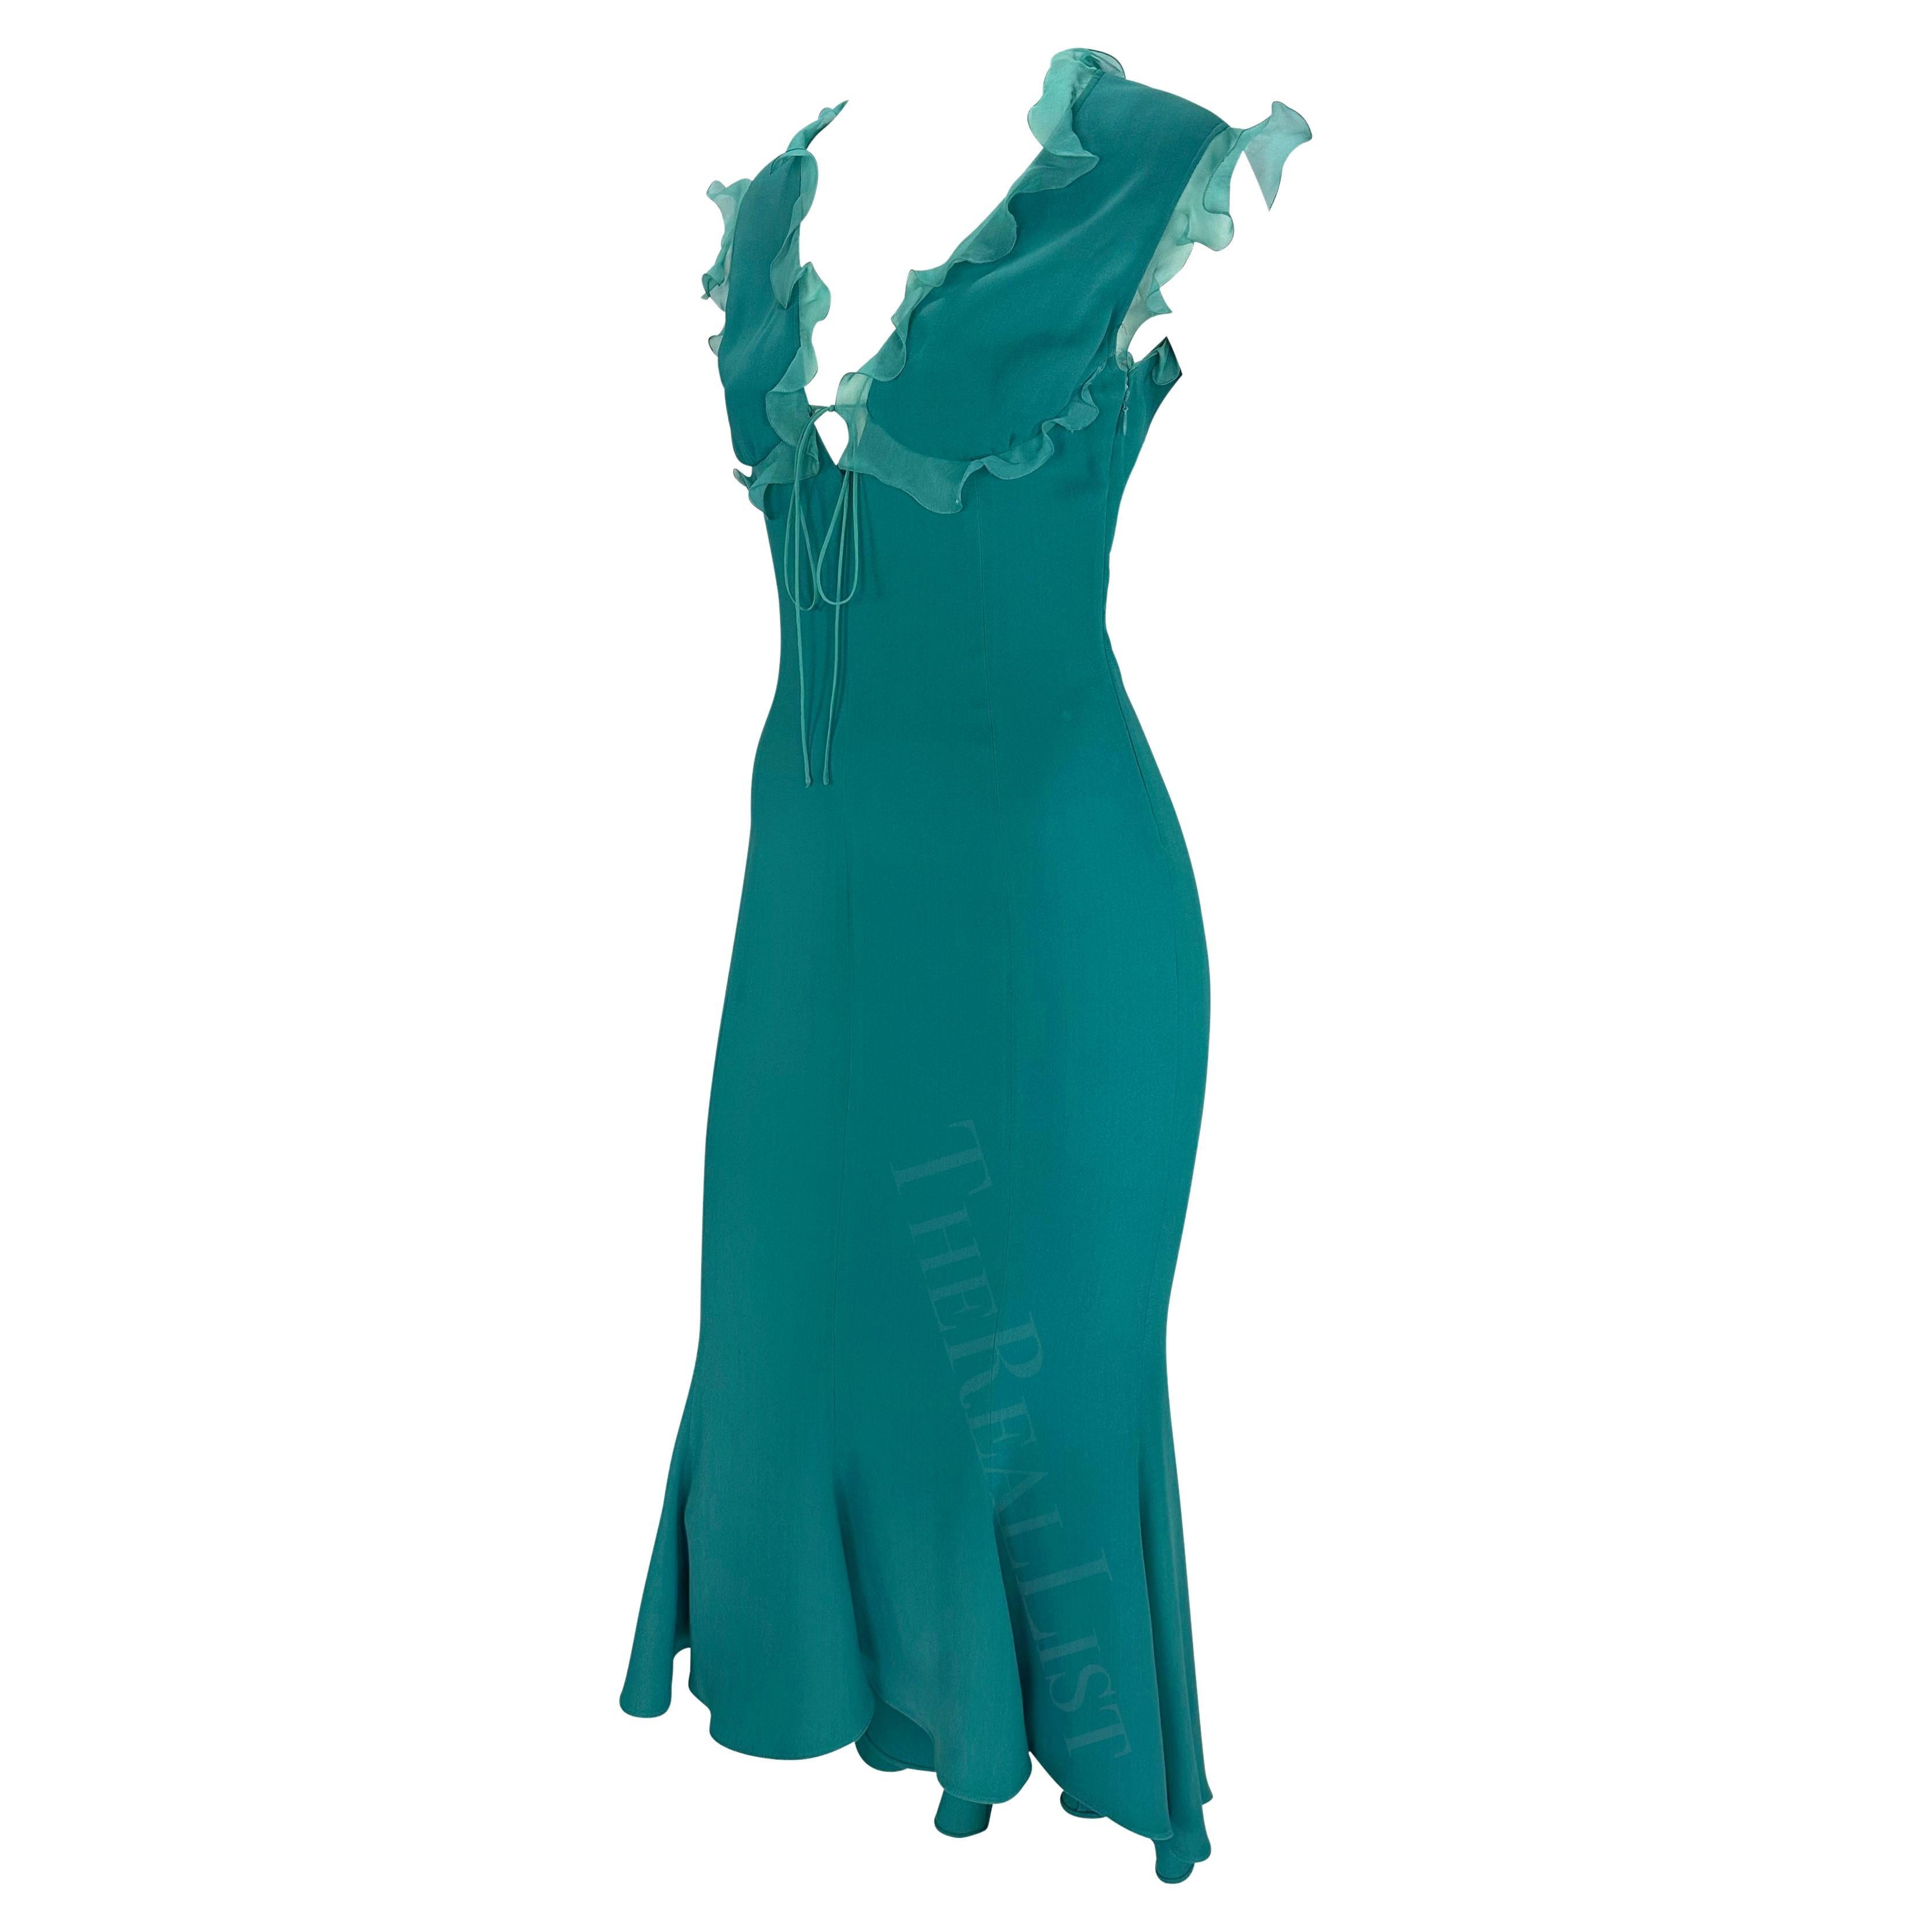 Presenting a beautiful teal Emanuel Ungaro midi dress. From the early 2000s, this dress is accented with chiffon ruffle details at the top and is made complete with a trumpet-style hem. This sexy Y2K dress is the perfect addition to any